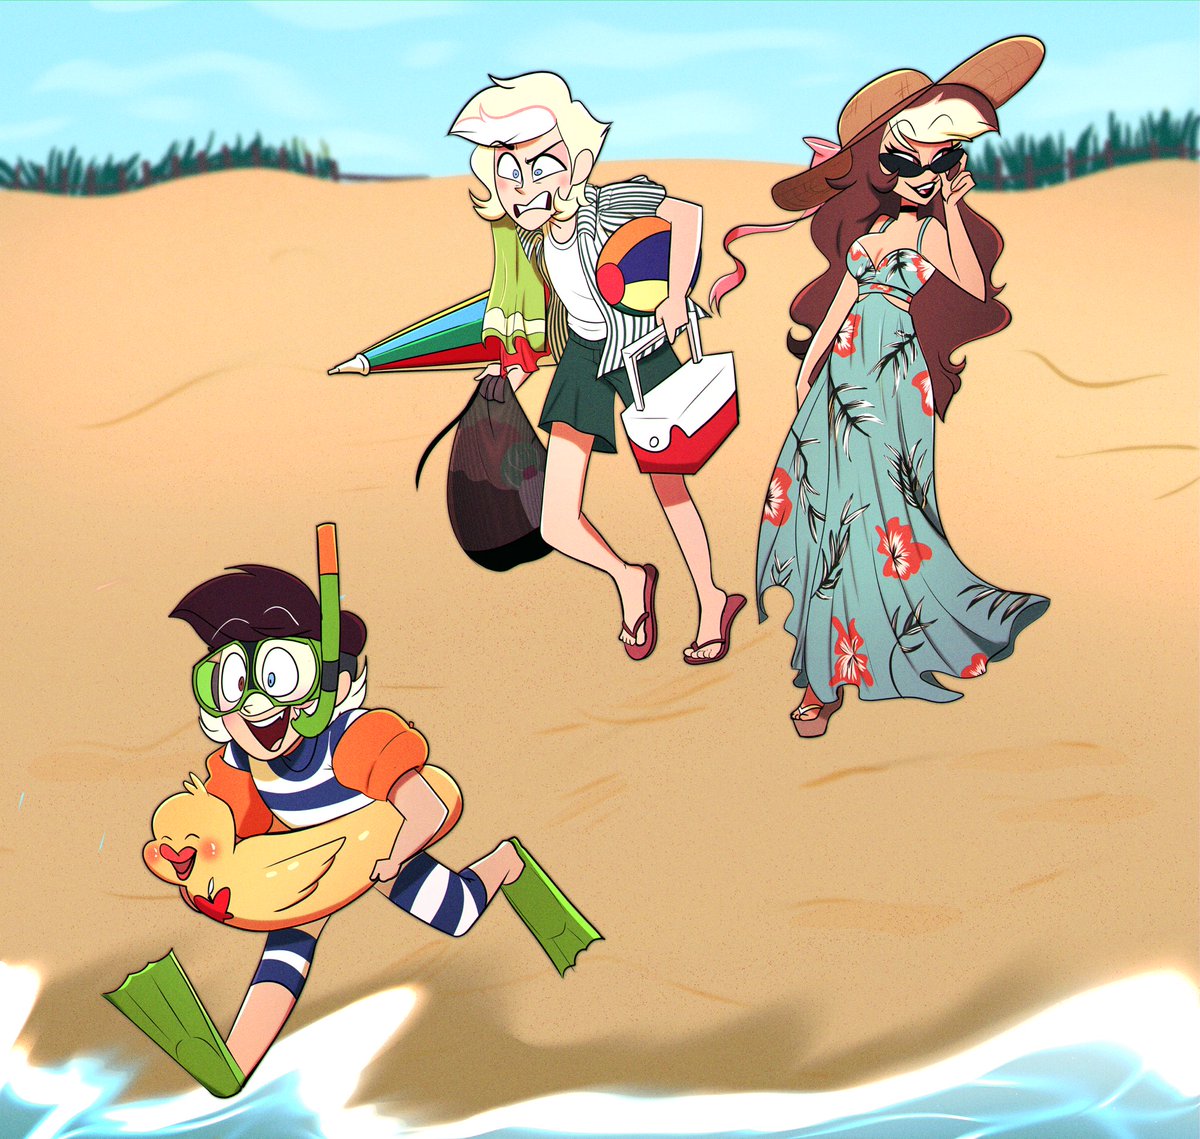 ✨@RavenouScorpian is the GOAT 🐐 and always has a way of bringing my ideas to life!✨

I’ve been meaning to get a comm of my #Charlastor / #RadioBelle kids in their human form so here they are! ☀️🏖️

#HazbinHotelOC